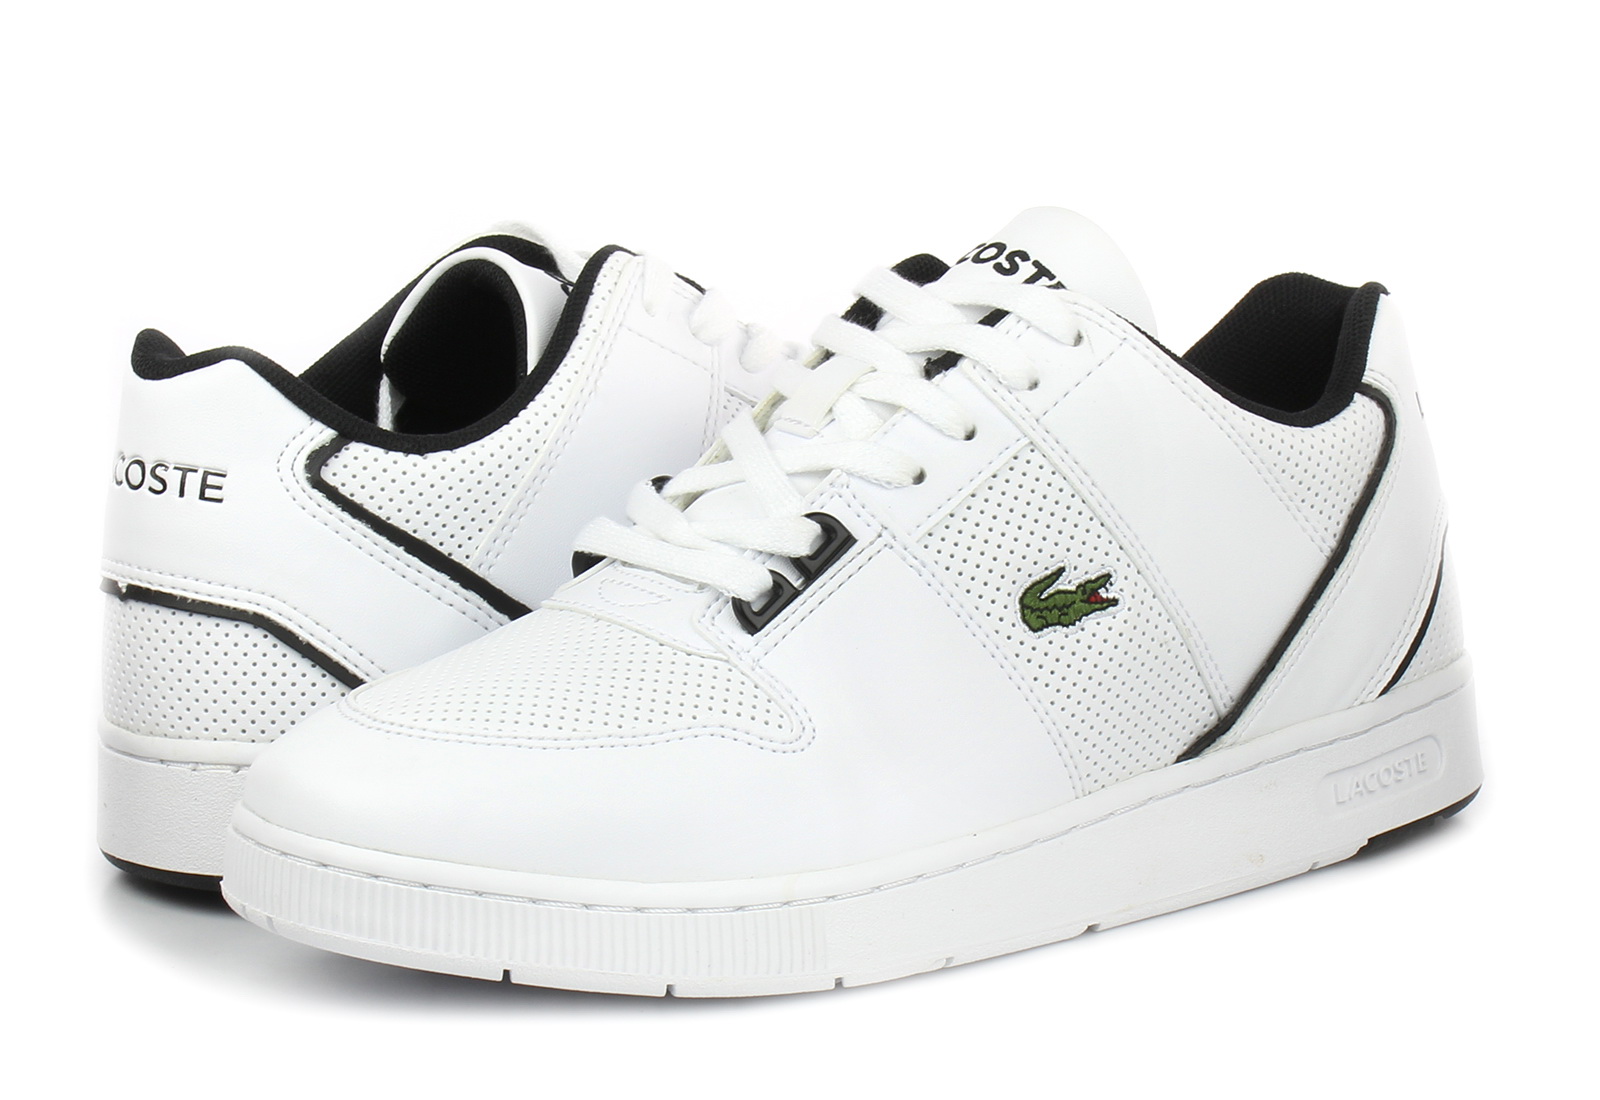 Lacoste Trainers - Thrill - 742SUJ0005-147 - Online shop for sneakers, shoes and